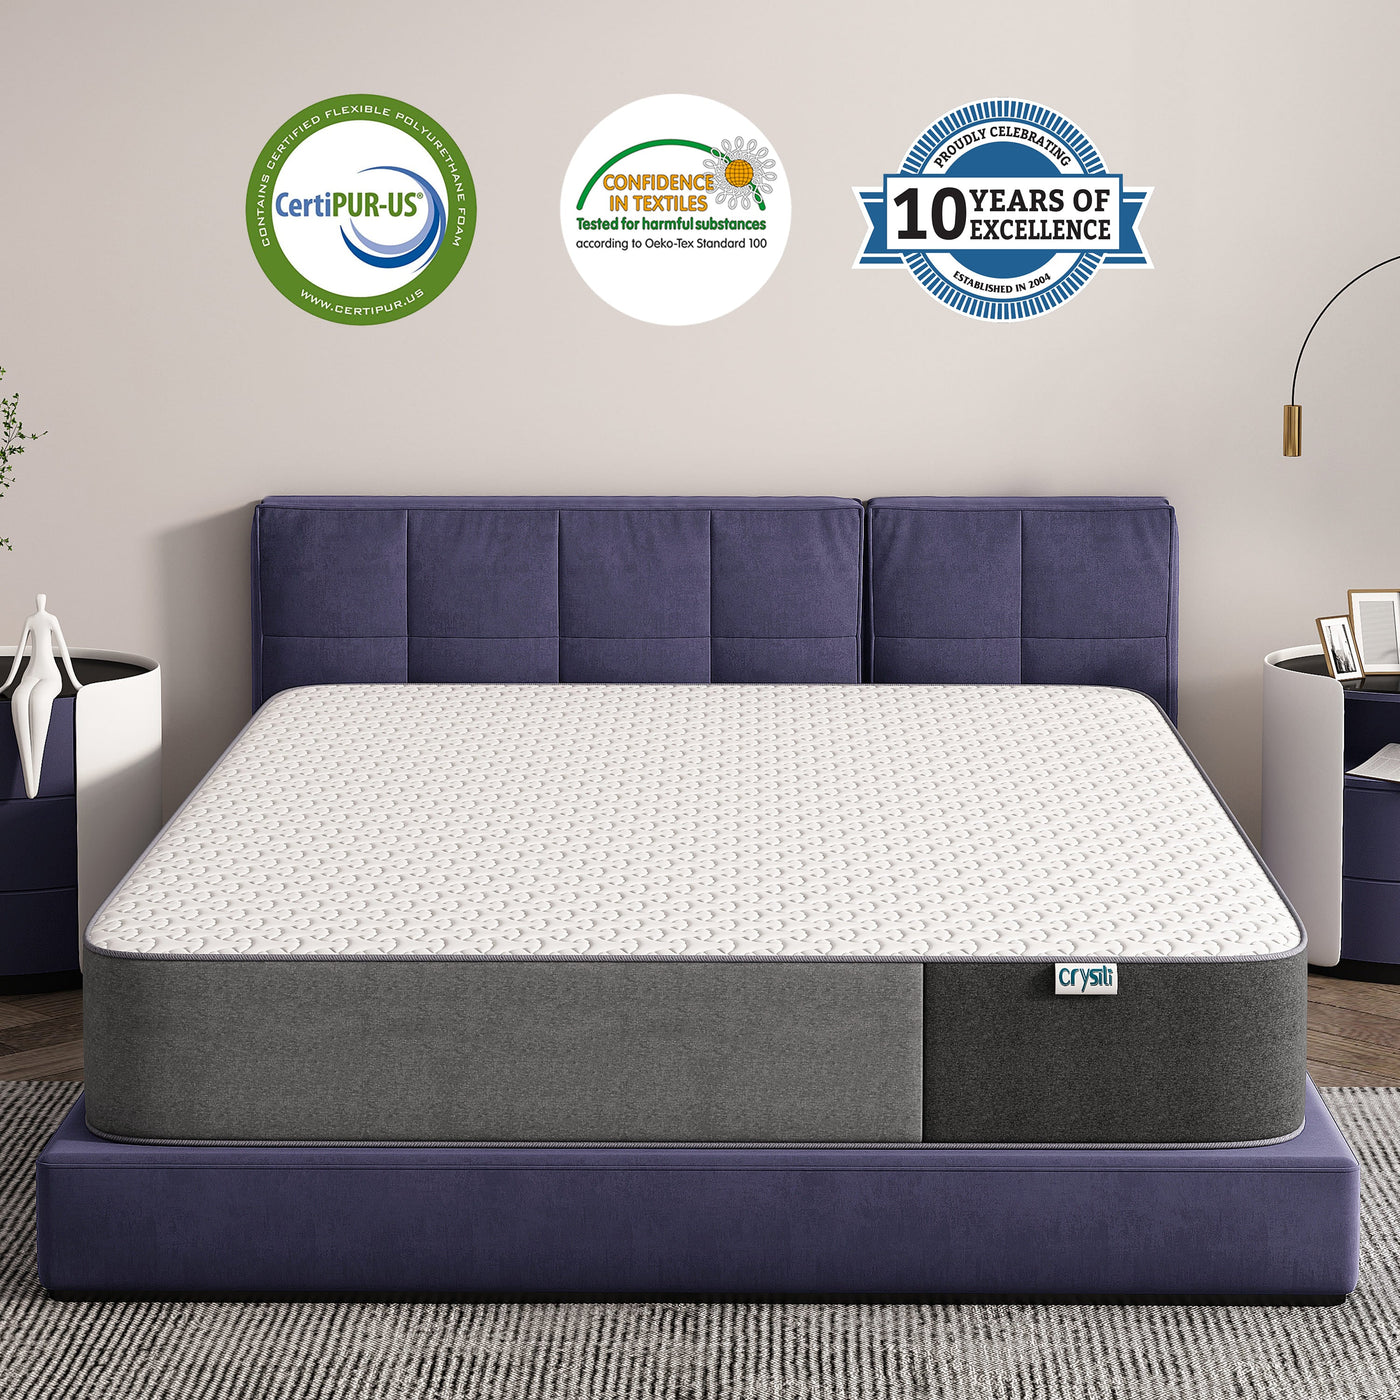 Big Promotion Crystli DC Collection| 6 inch Memory Foam Mattress with CertiPUR-US Certified (CA)